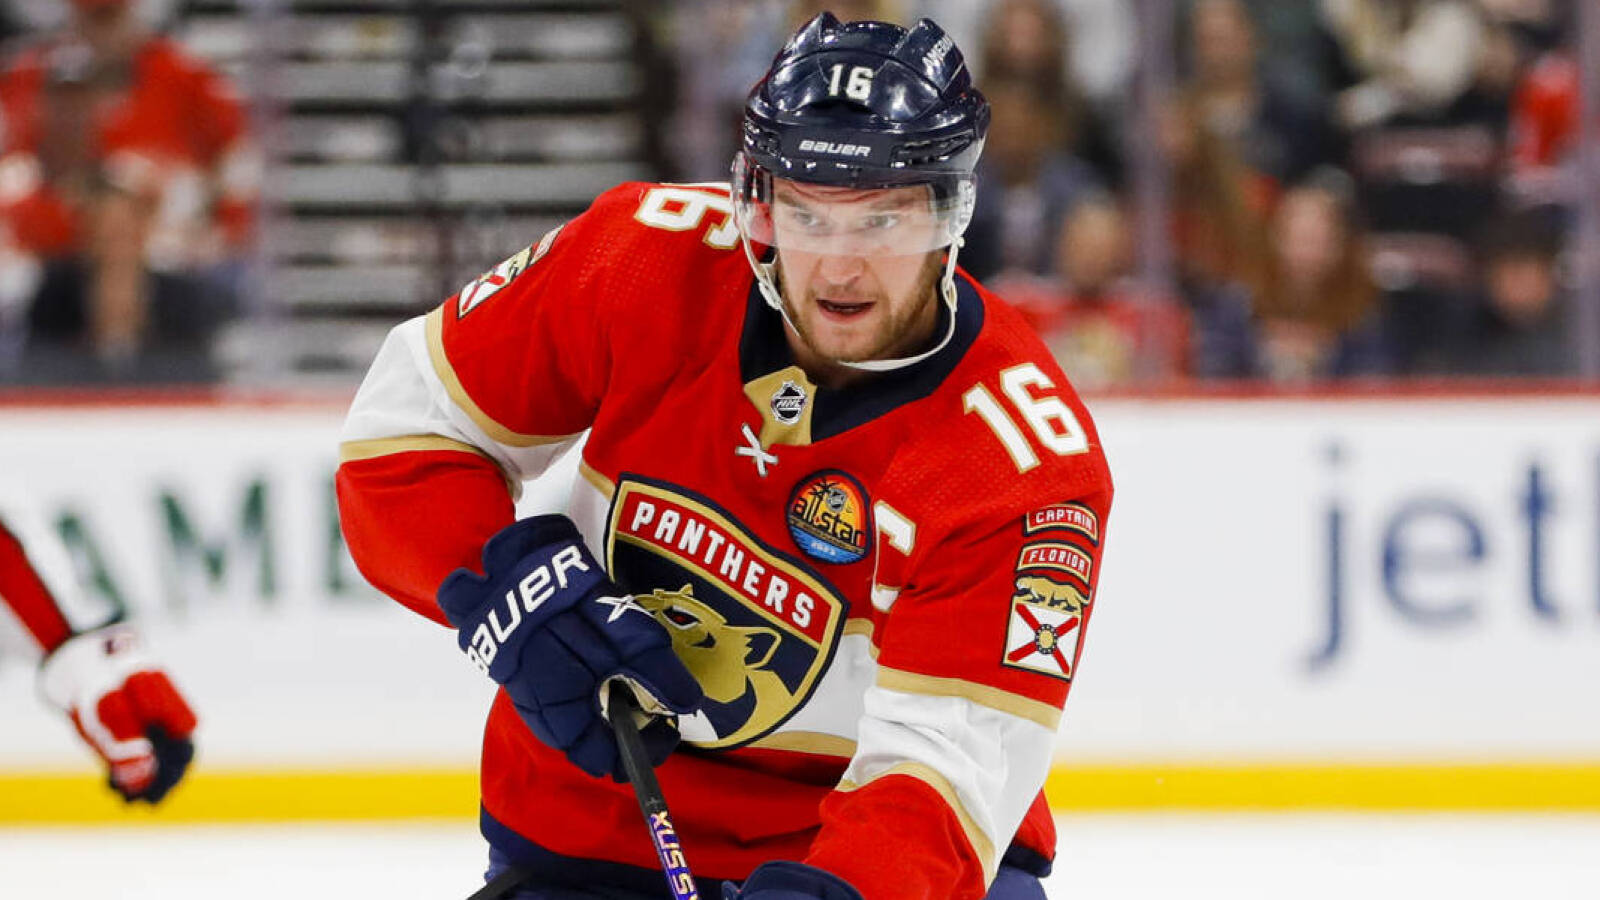 Fans anxious as Aleksander Barkov leaves Game 3 with lower-body